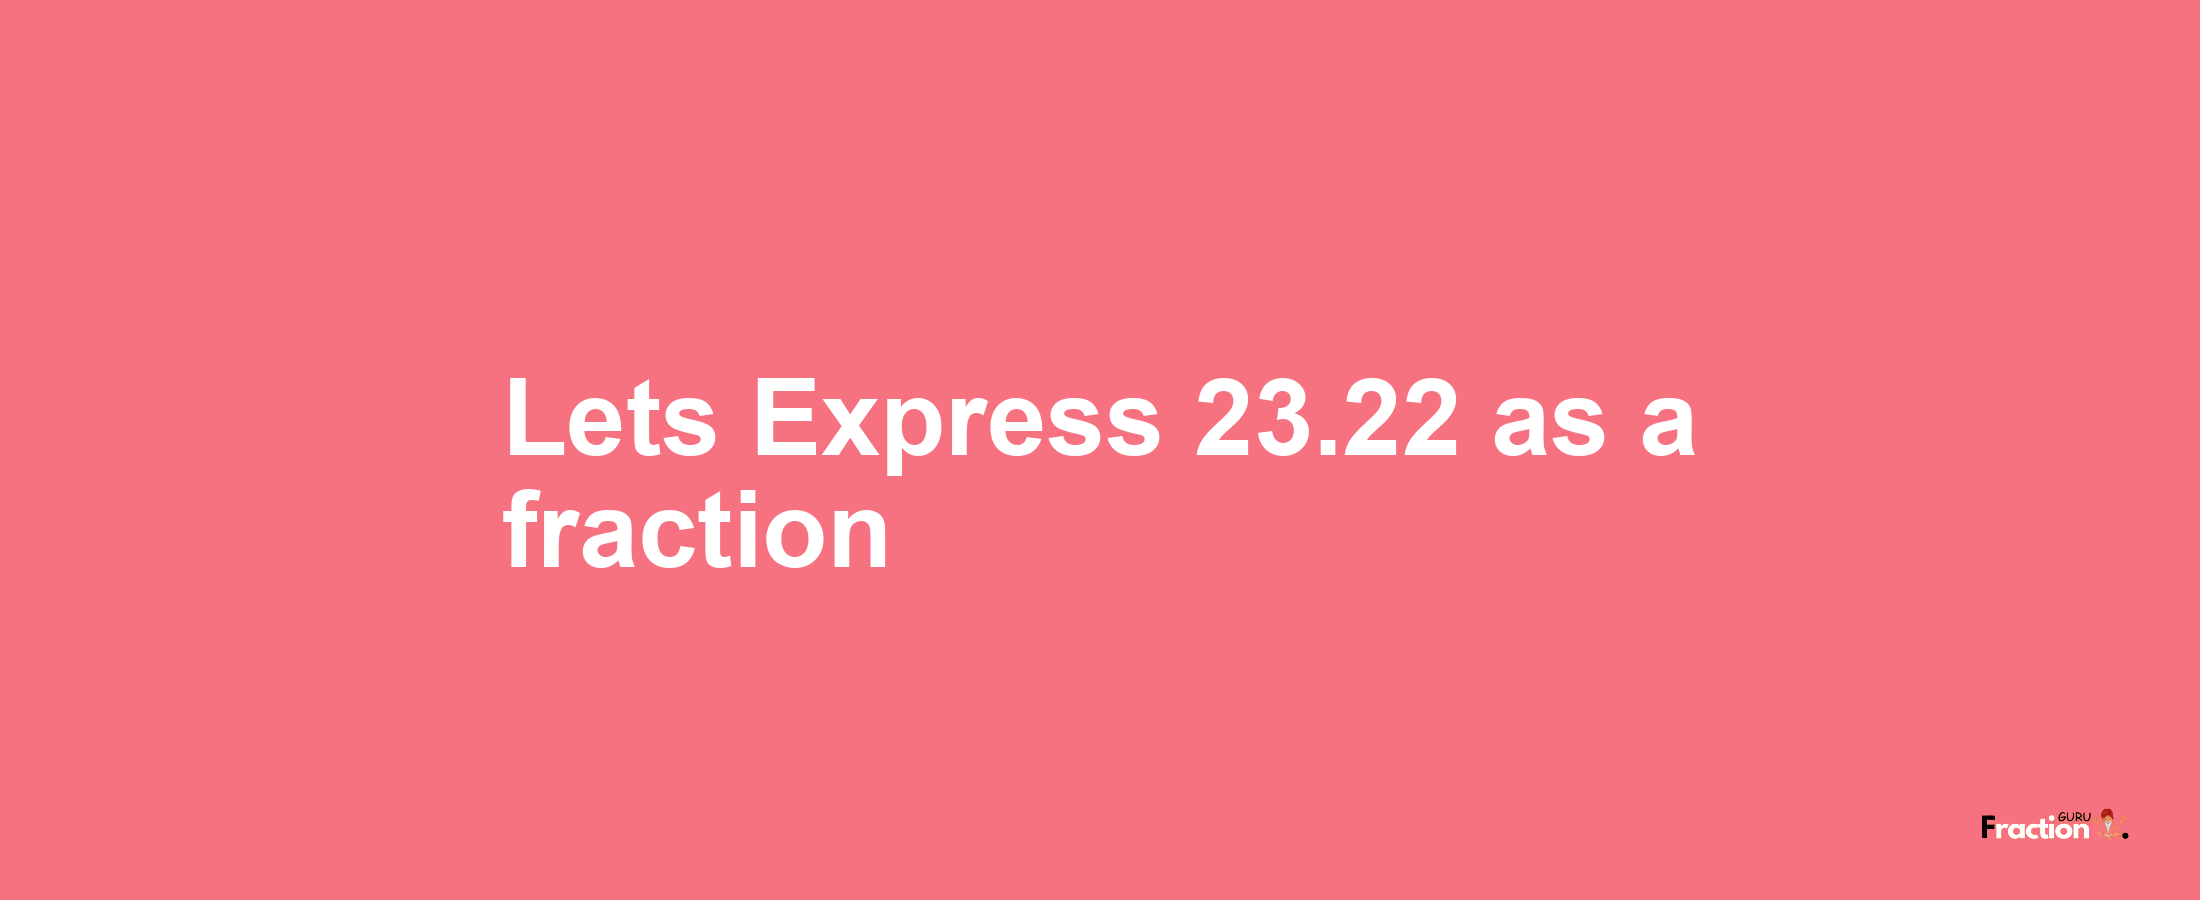 Lets Express 23.22 as afraction